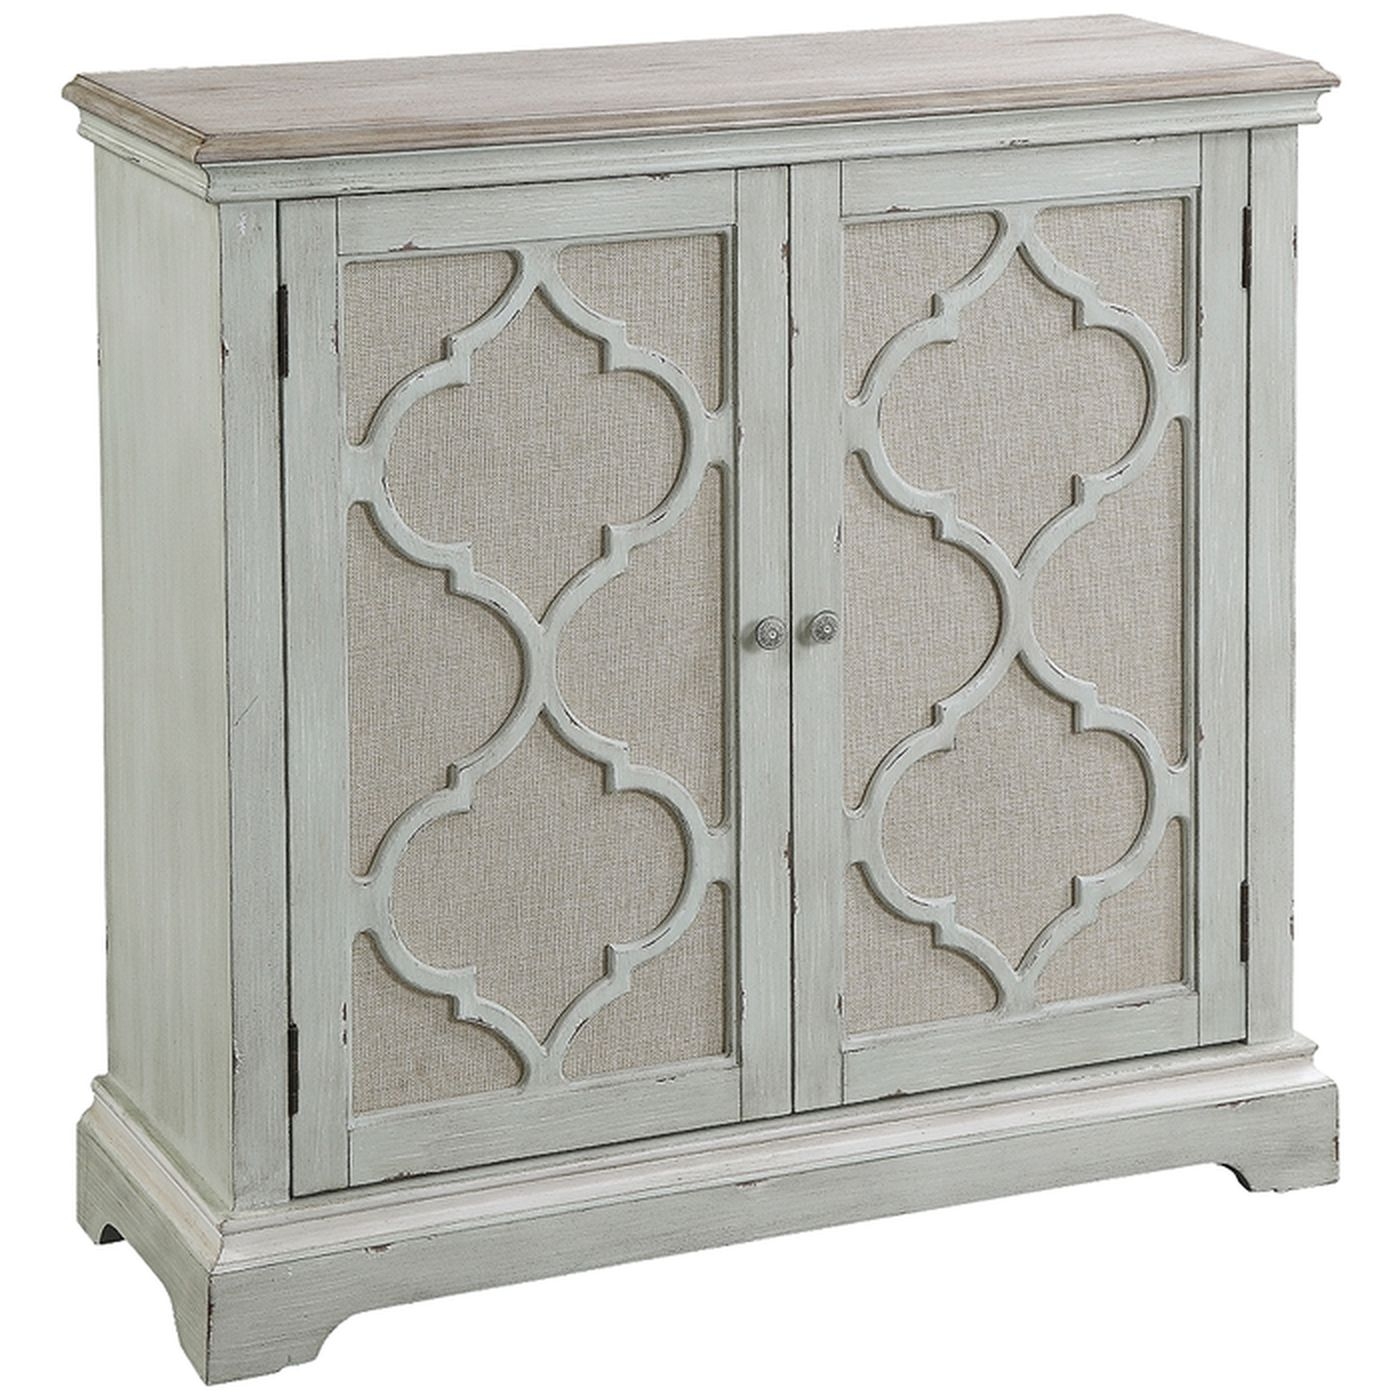 Sophie 38" Wide Weathered Sea Gray 2-Door Accent Cabinet - Style # 89F58 - Image 0